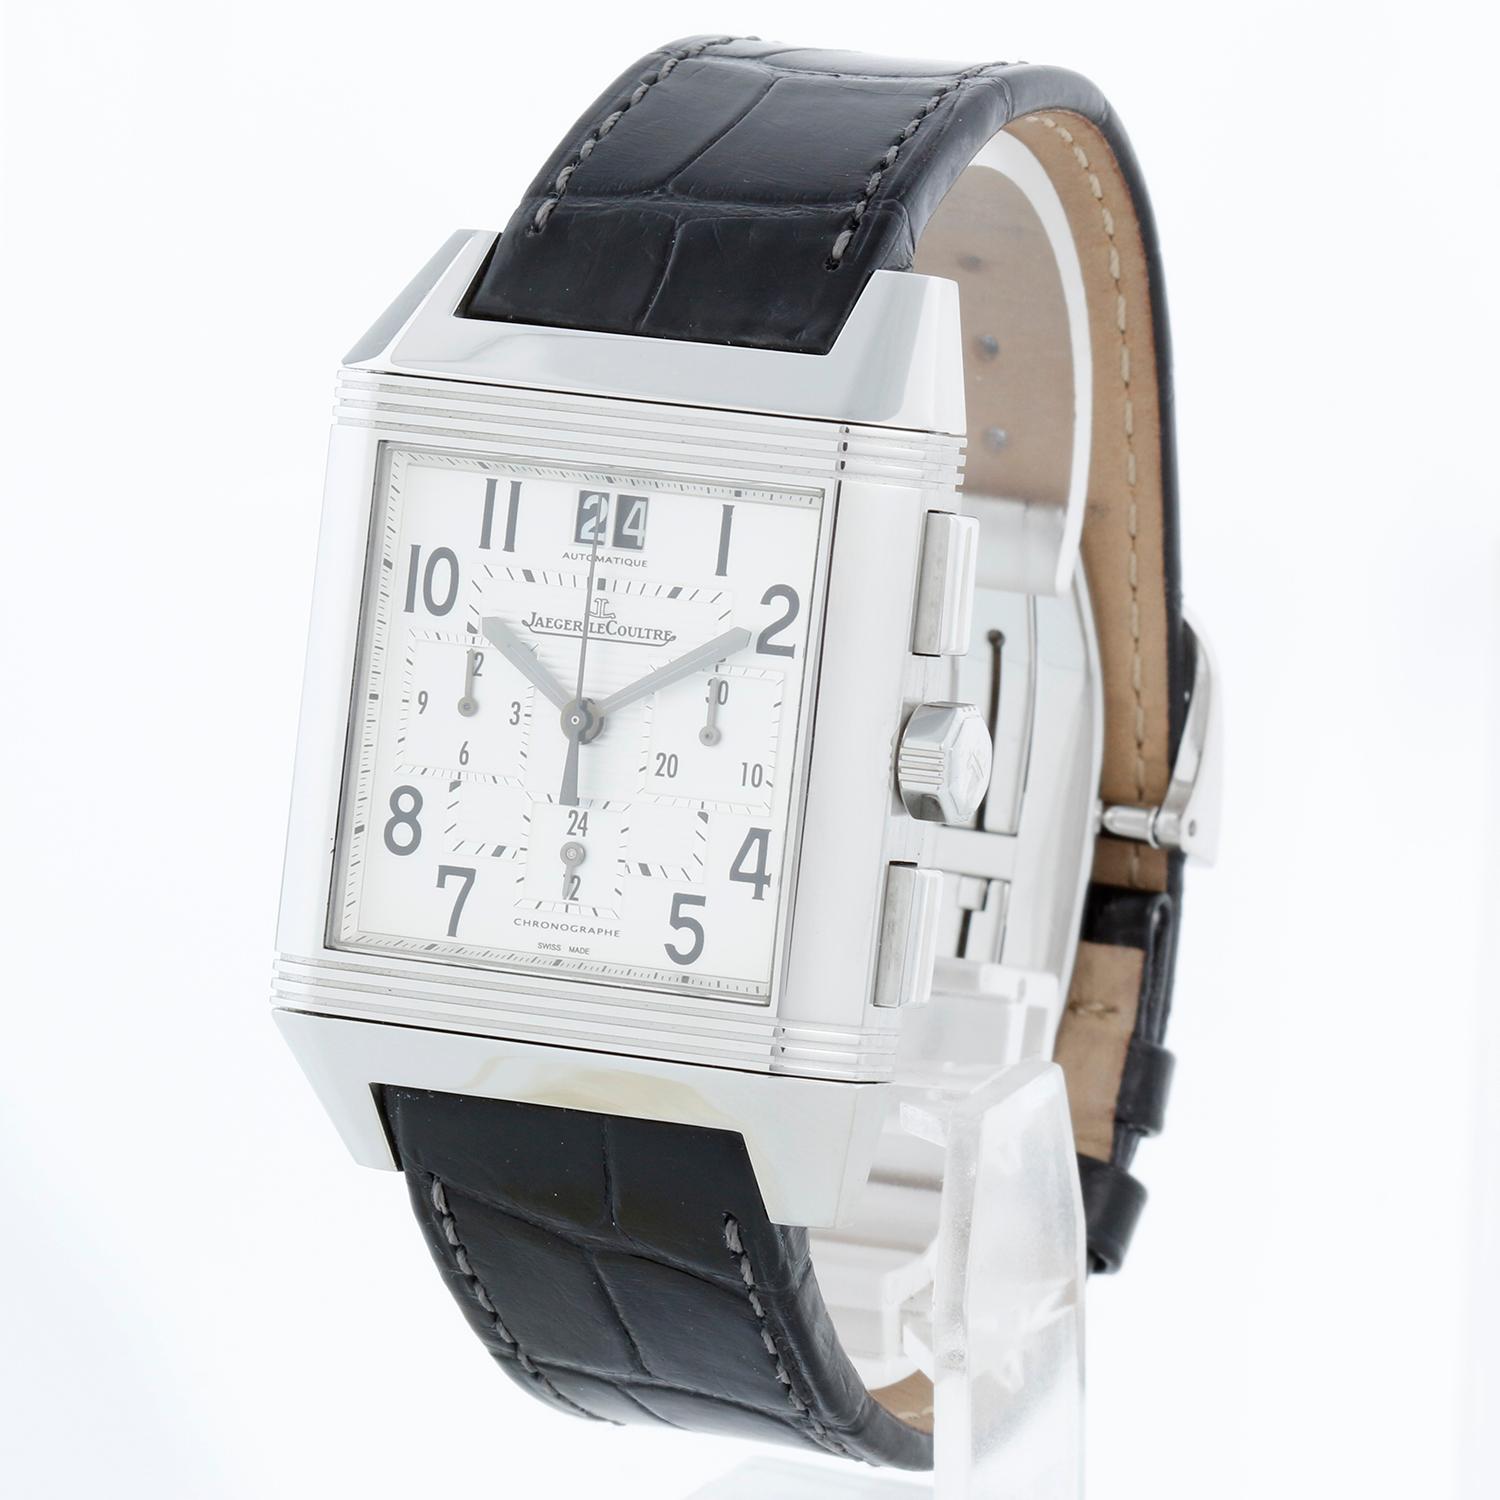 Jaeger-LeCoultre Reverso Squadra GMT Chronograph Watch 701.86.20 - Automatic; Chronograph. Stainless Steel Case with transparent case back  ( 35 x 41 mm ). Silver dial with luminous  hands and Arabic hour markers;  three sub-dials displaying: 12